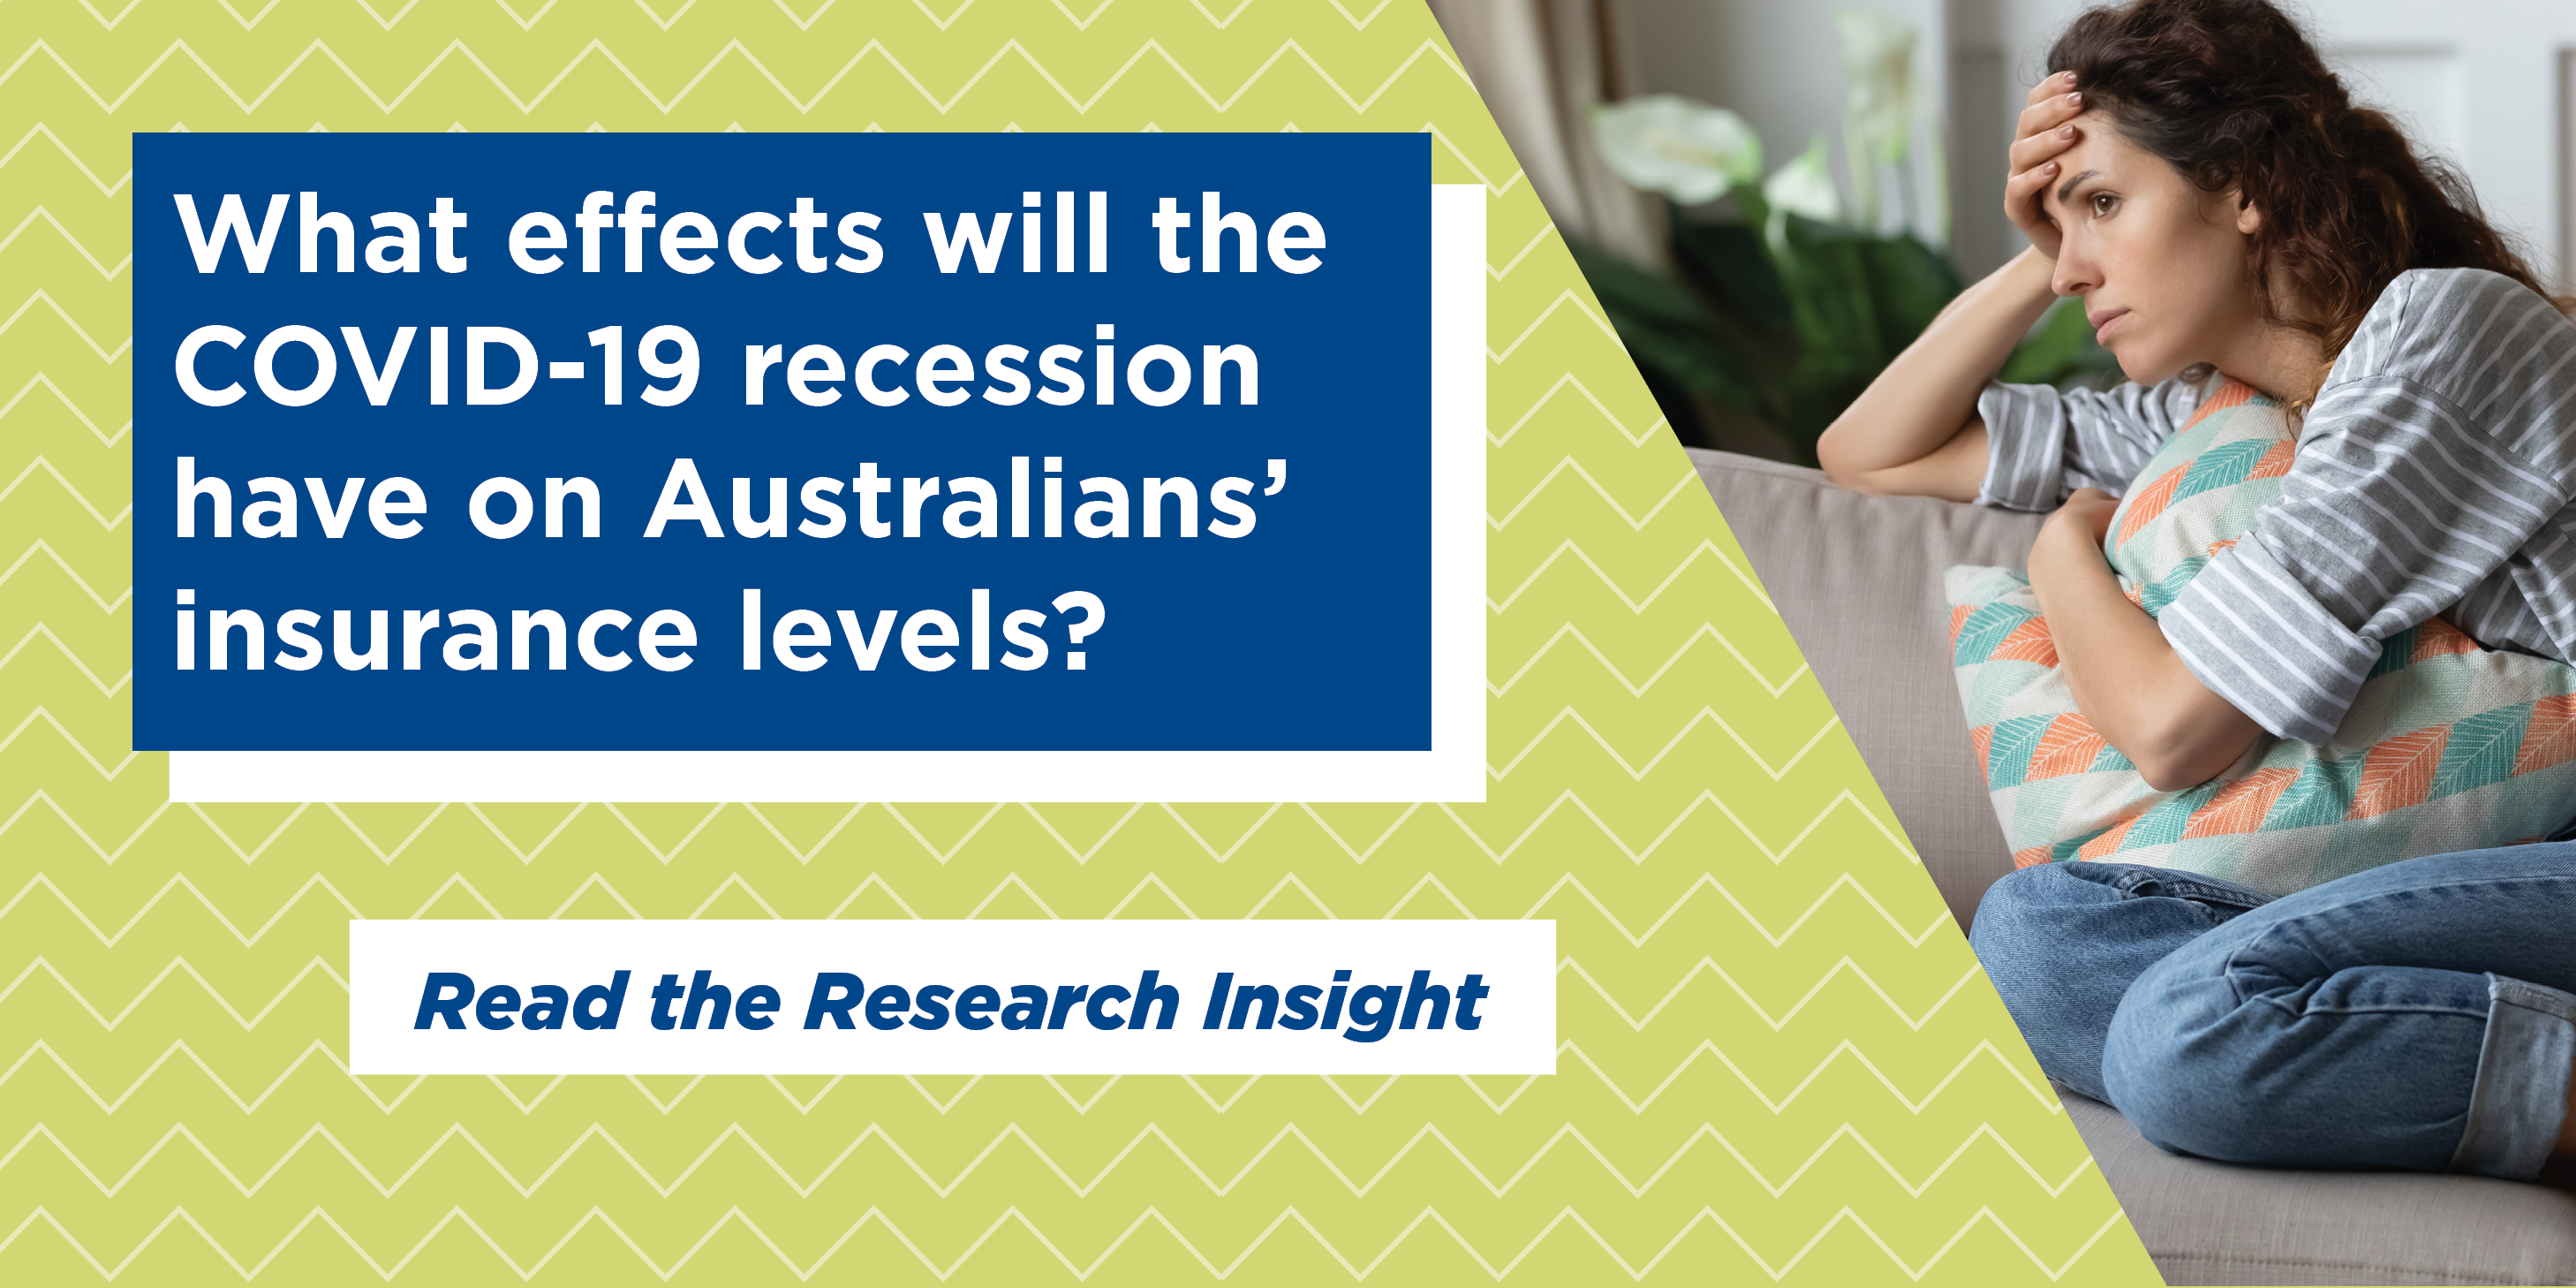 What effects will the COVID-19 recession have on Australians’ insurance levels?